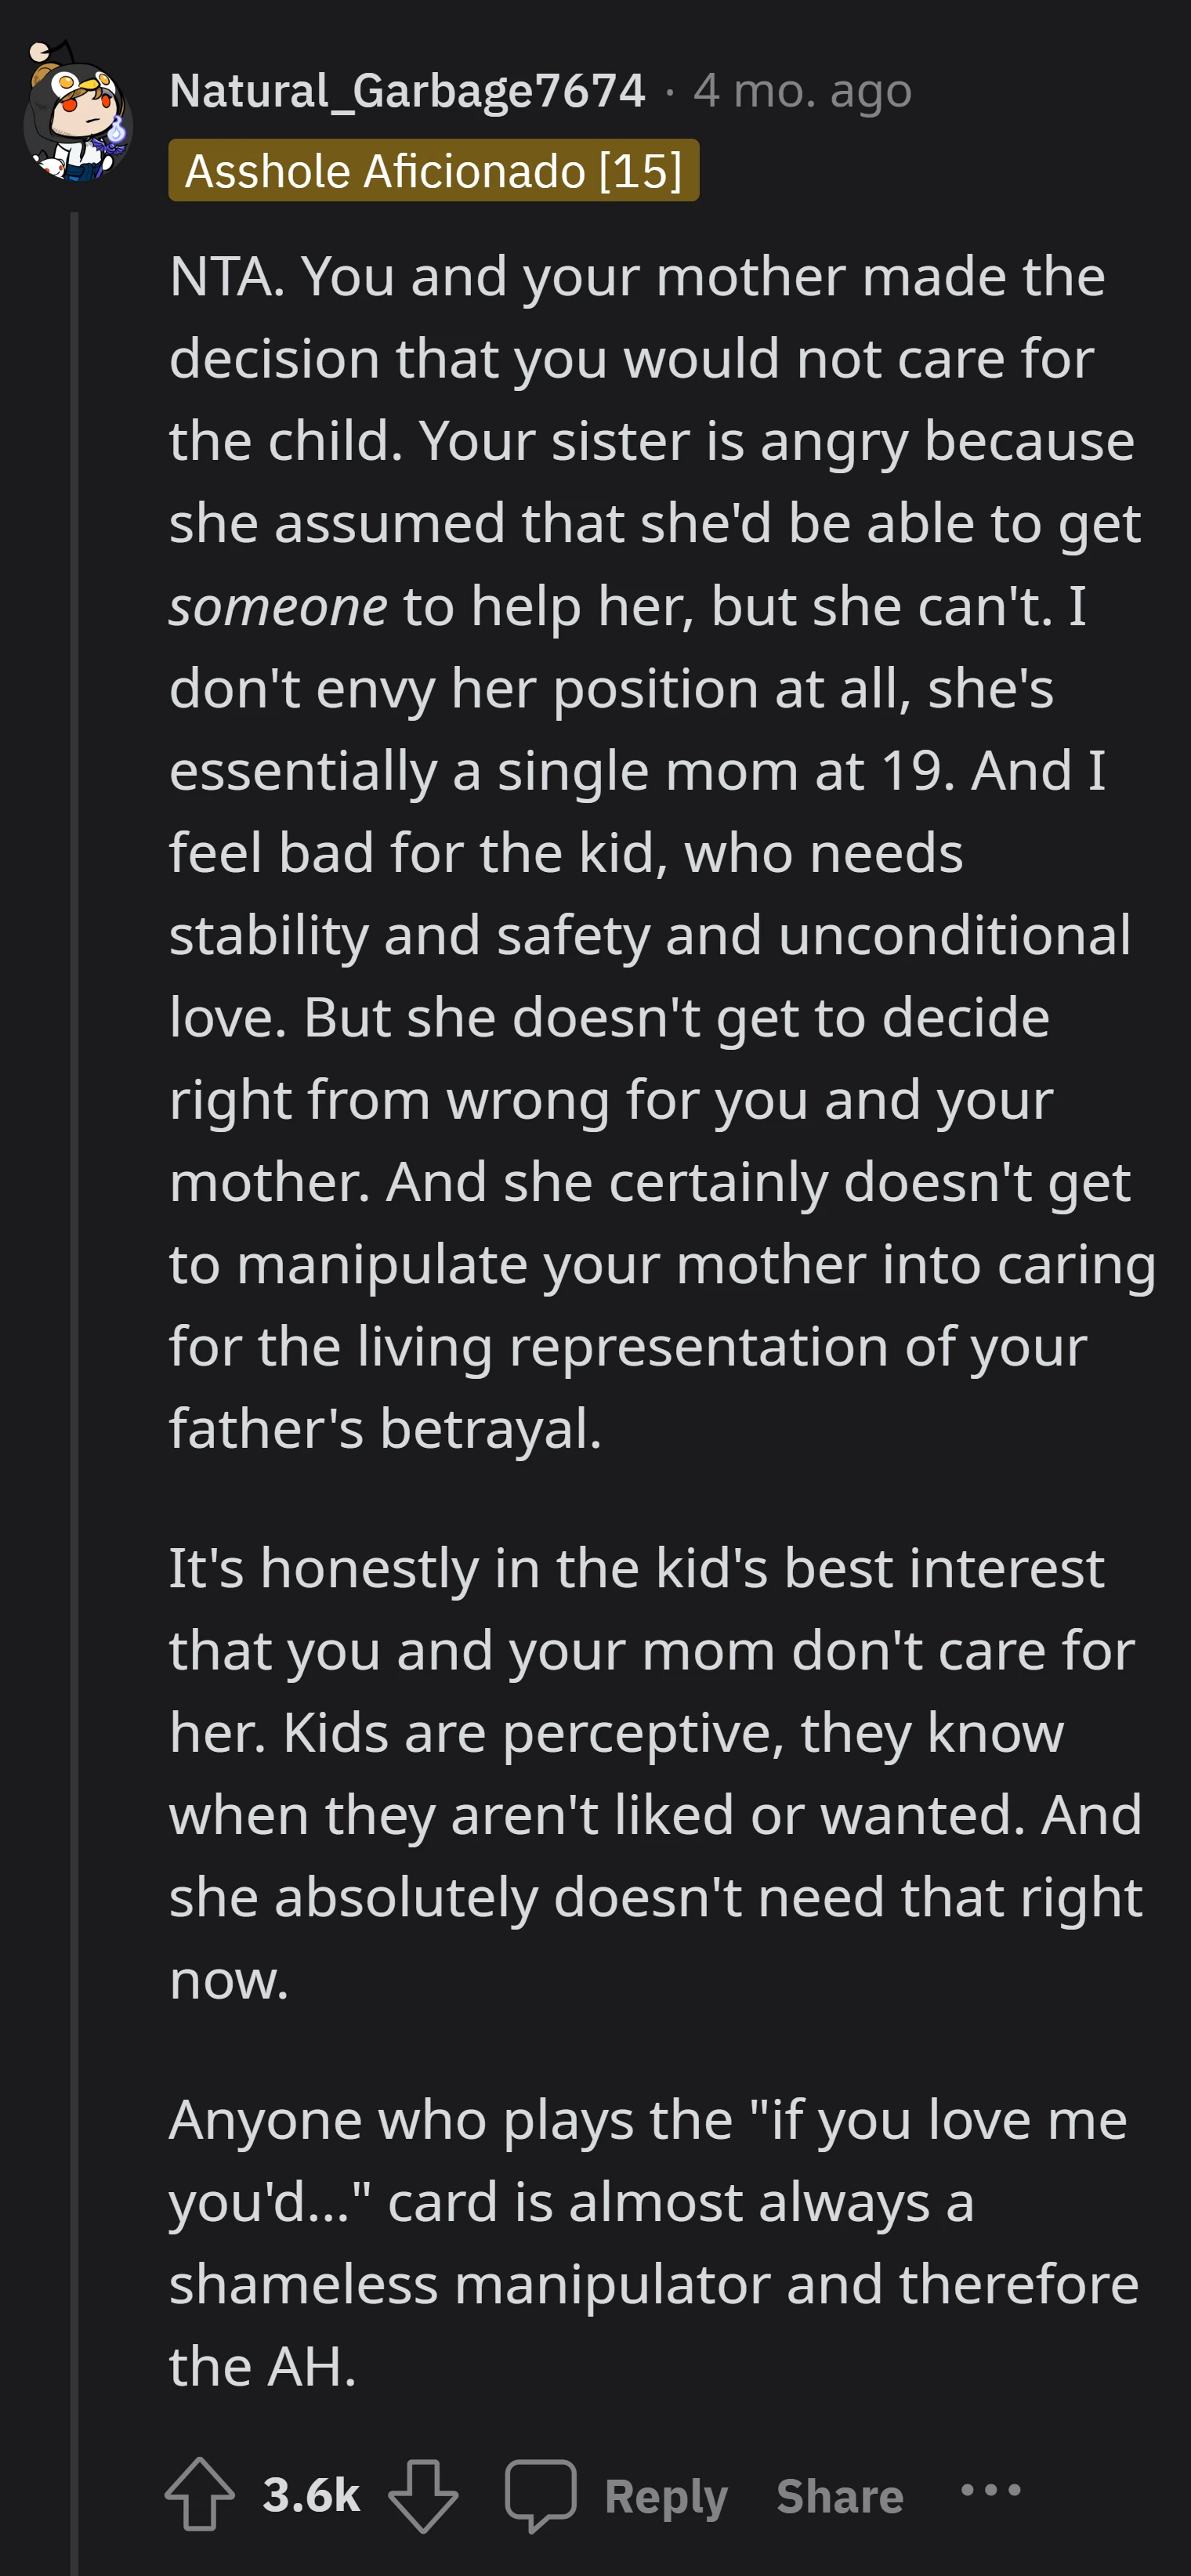 Redditor feels sorry for her sister's situation as a young single mom